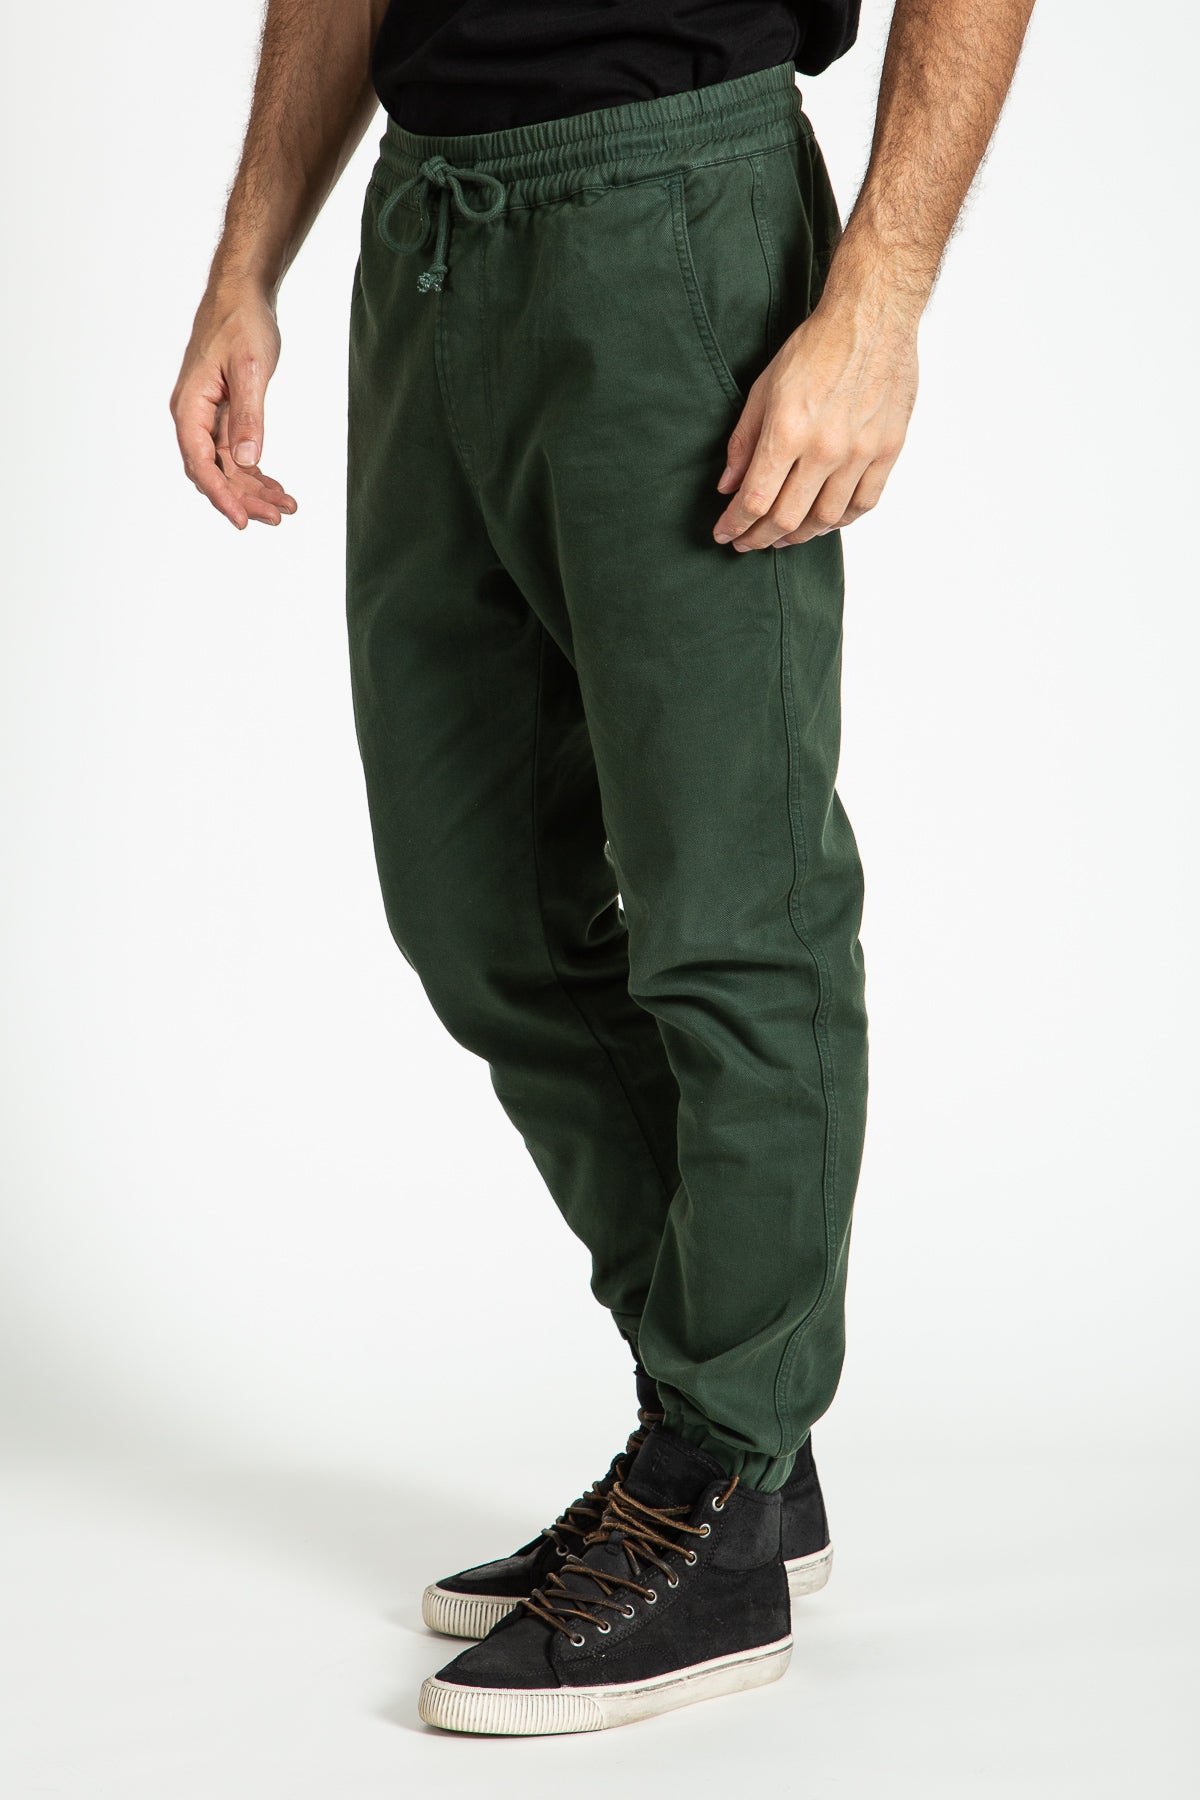 JOGGER PANTS IN MOUNTAIN – Stitch's Jeans